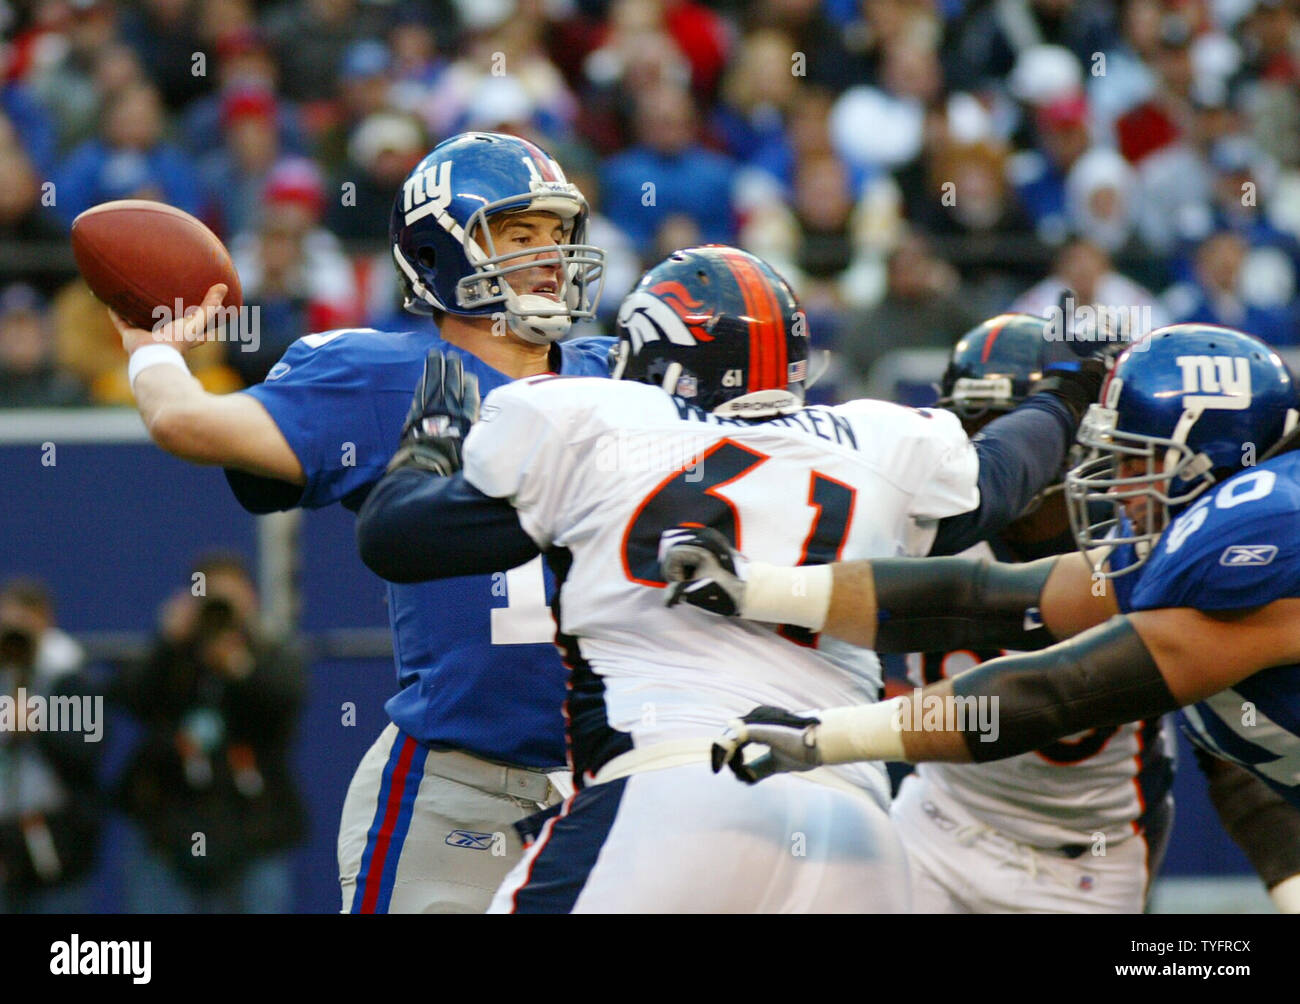 New York Giants quarterback Eli Manning releases a pass in the second  quarter against the Dallas Cowboys at Giants Stadium in East Rutherford,  New Jersey on November 11, 2007. (UPI Photo/John Angelillo